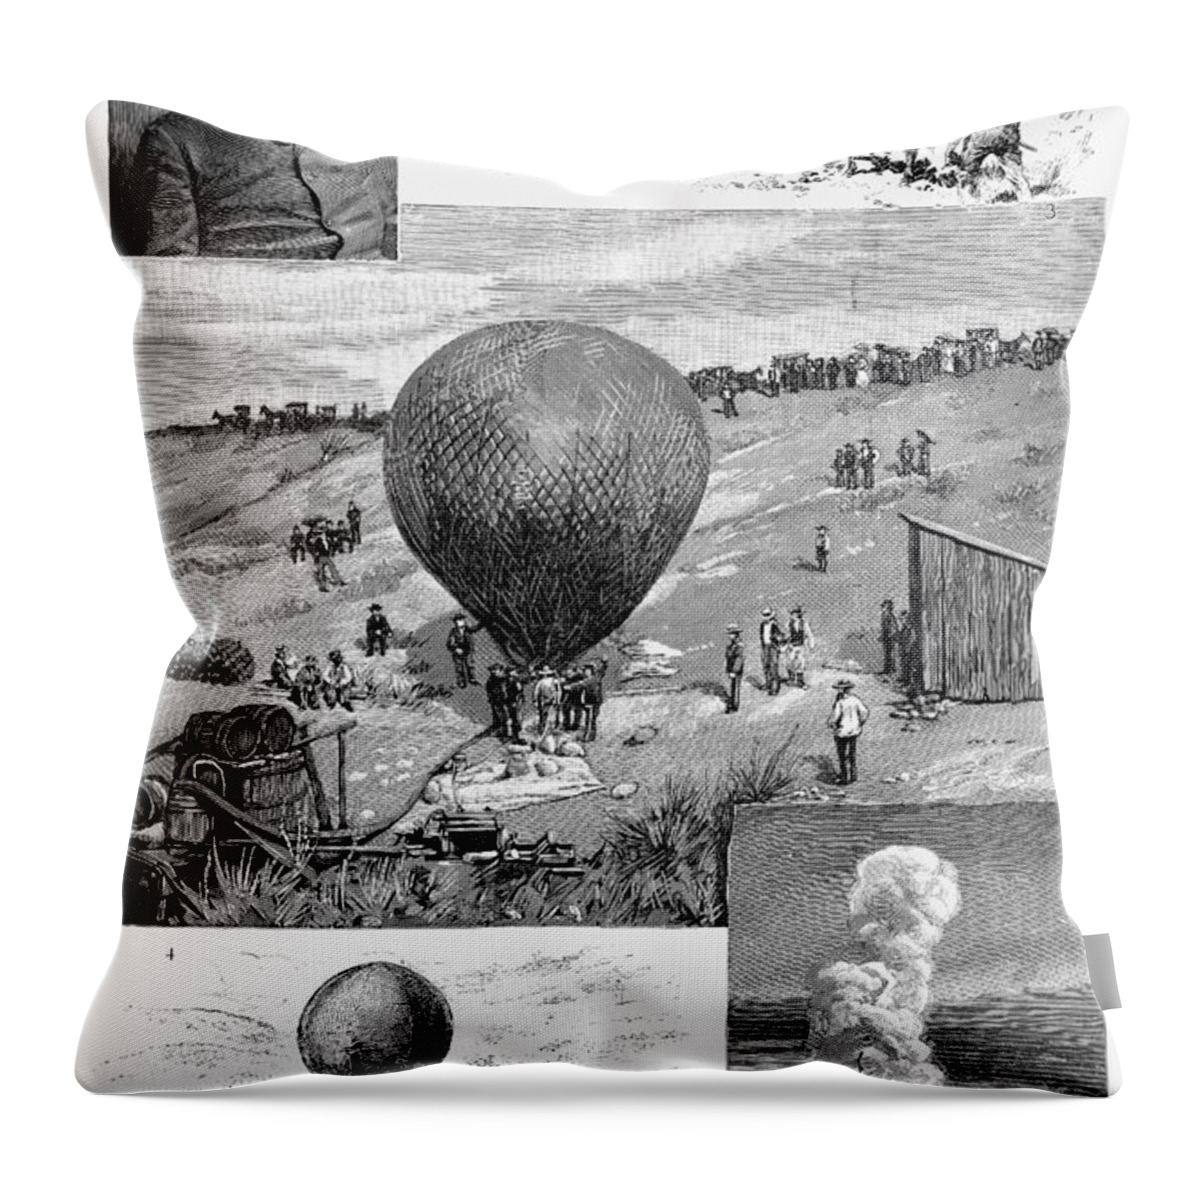 1891 Throw Pillow featuring the photograph Rainmaking, 1891 by Granger